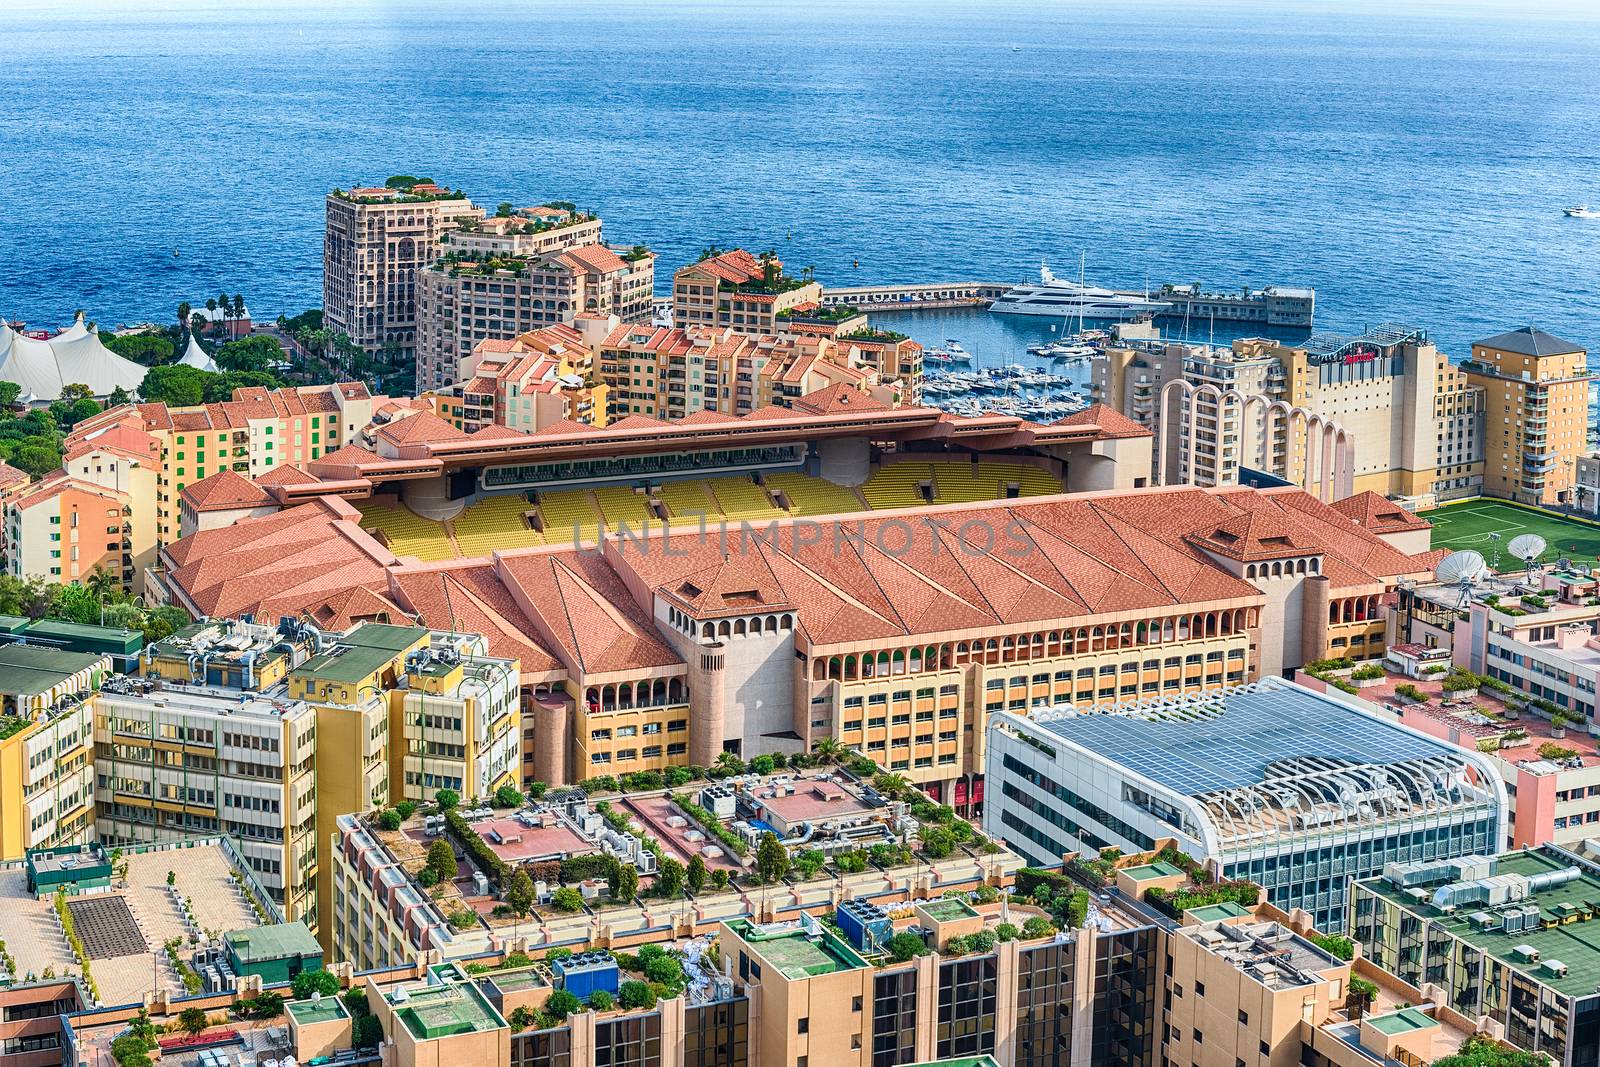 Aerial view of the Louis II stadium. It is located in the Fontvieille district of Monaco, Cote d'Azur, French Riviera